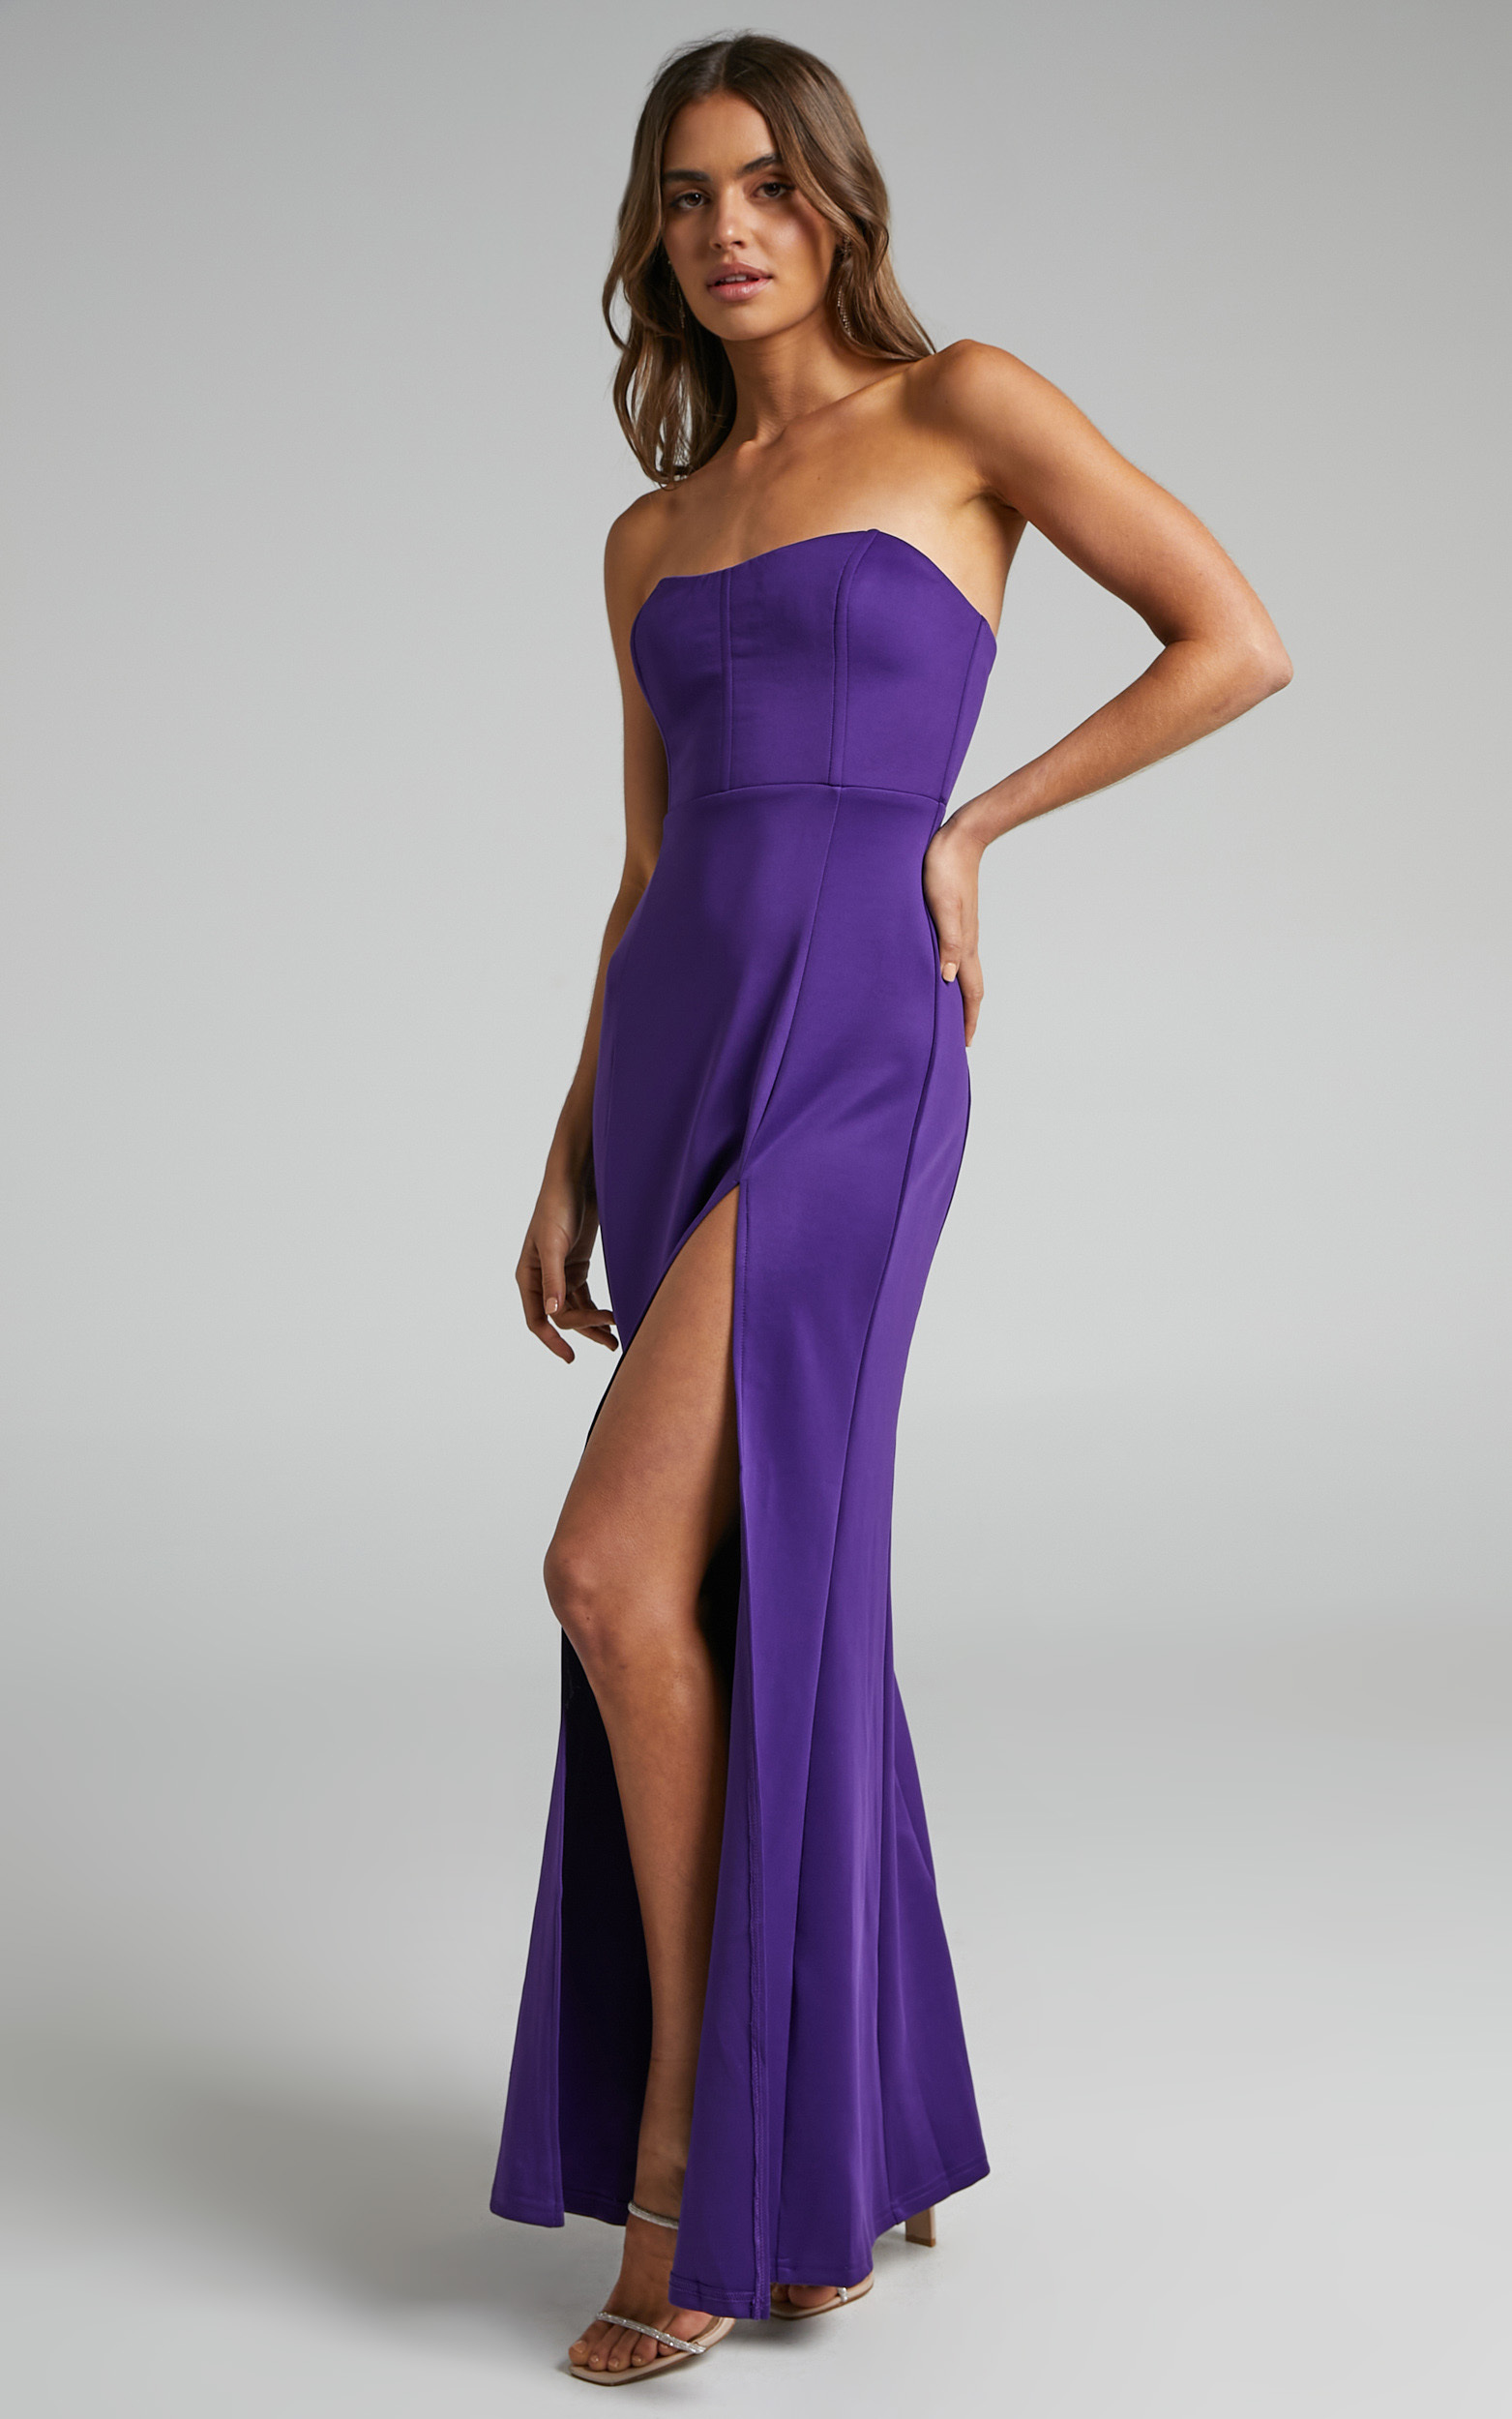 Sarisa Strapless Thigh Split Maxi Dress in Purple - 06, NVY1, hi-res image number null